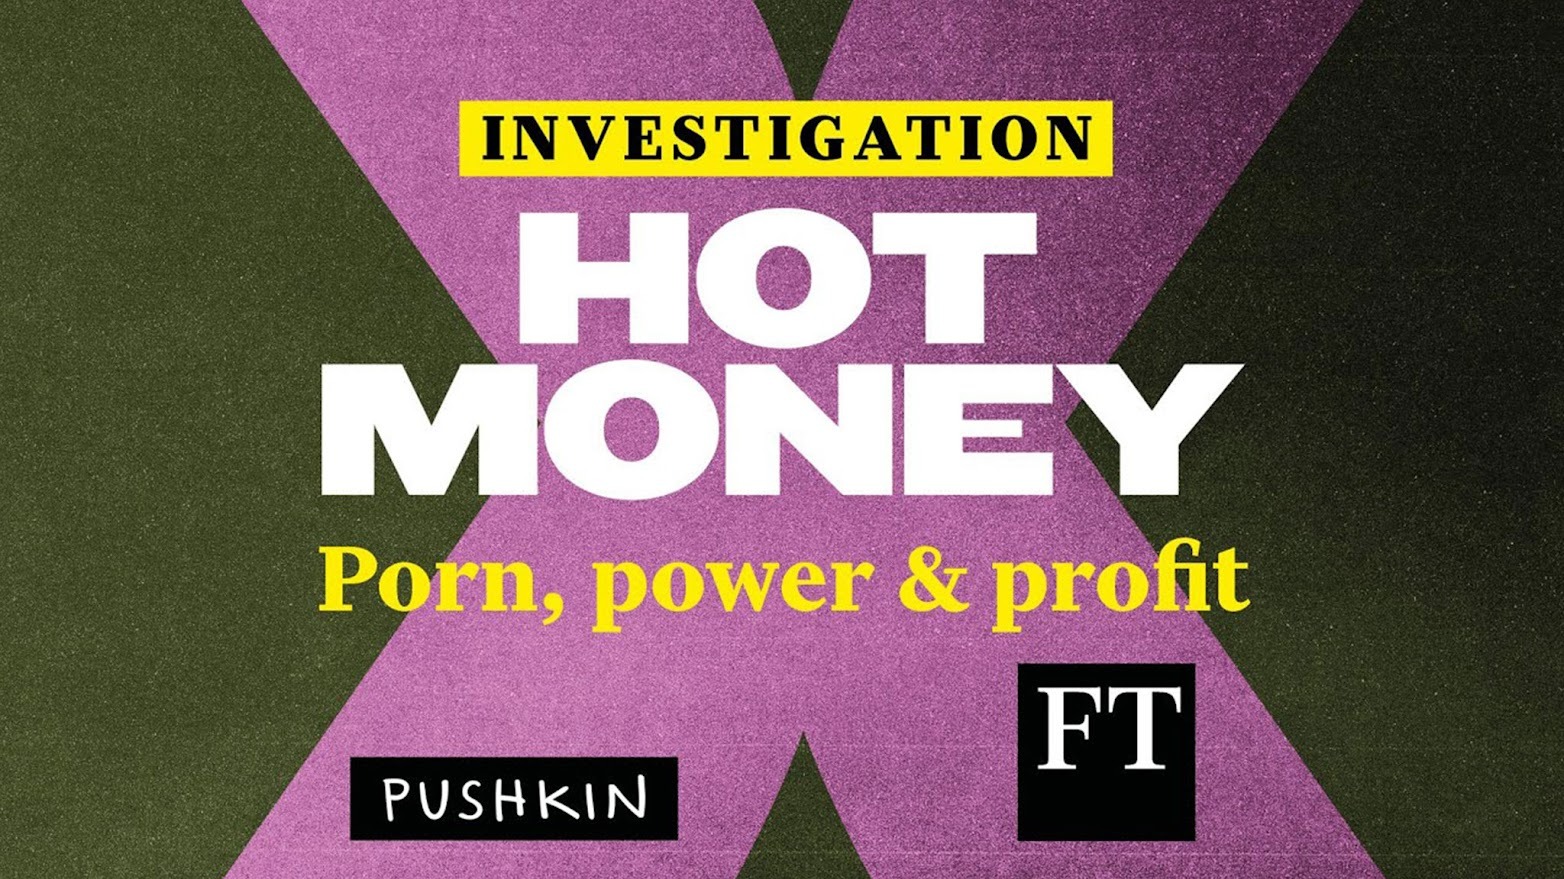 Blonde European Porn Purple Shirt - Knocking on the door of a porn empire | Financial Times